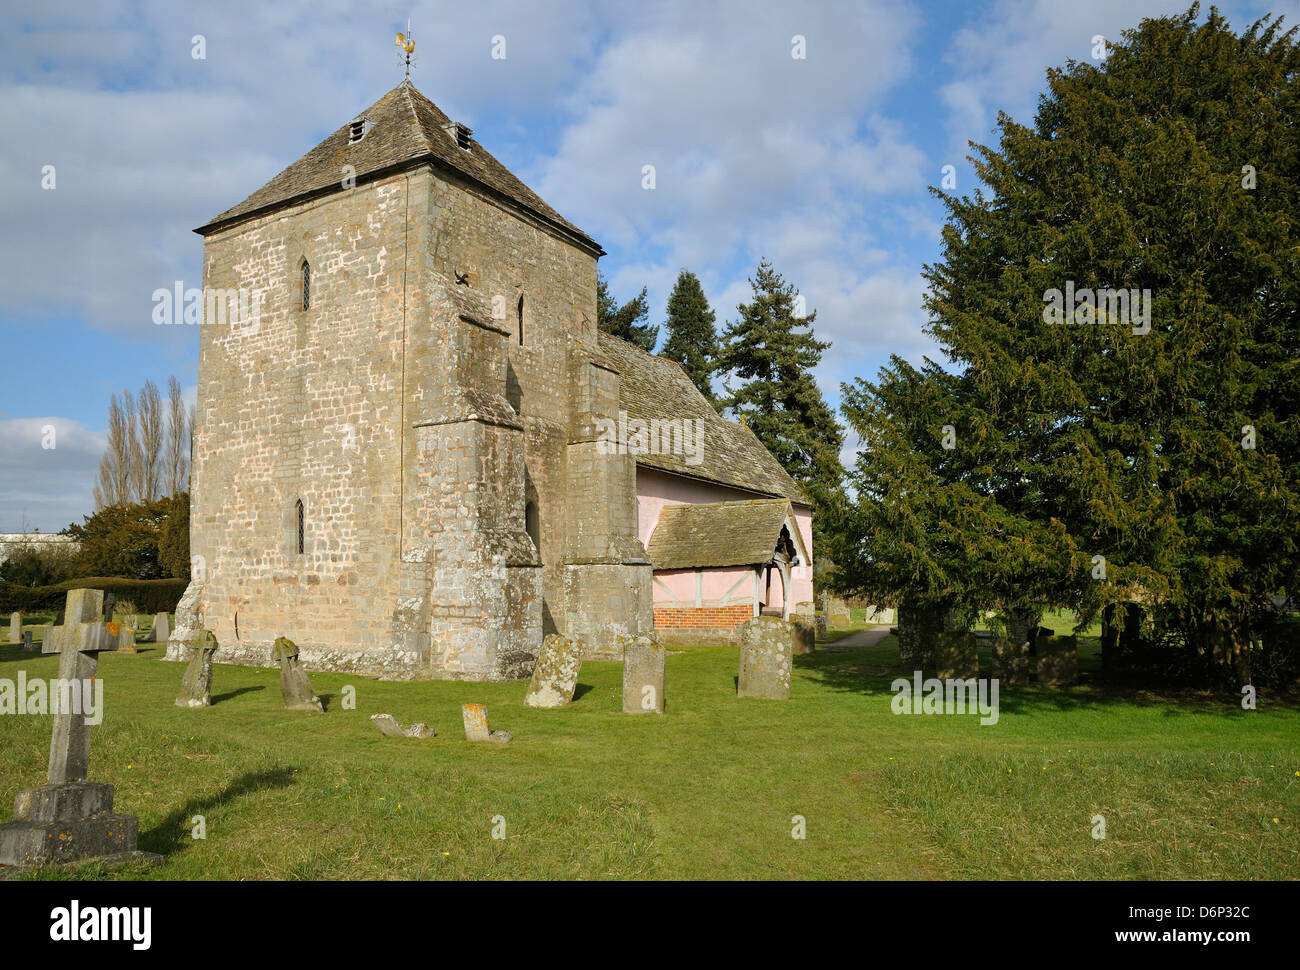 St Marys xi secolo chiesa normanna, Kempley, Newent, Gloucestershire Foto Stock